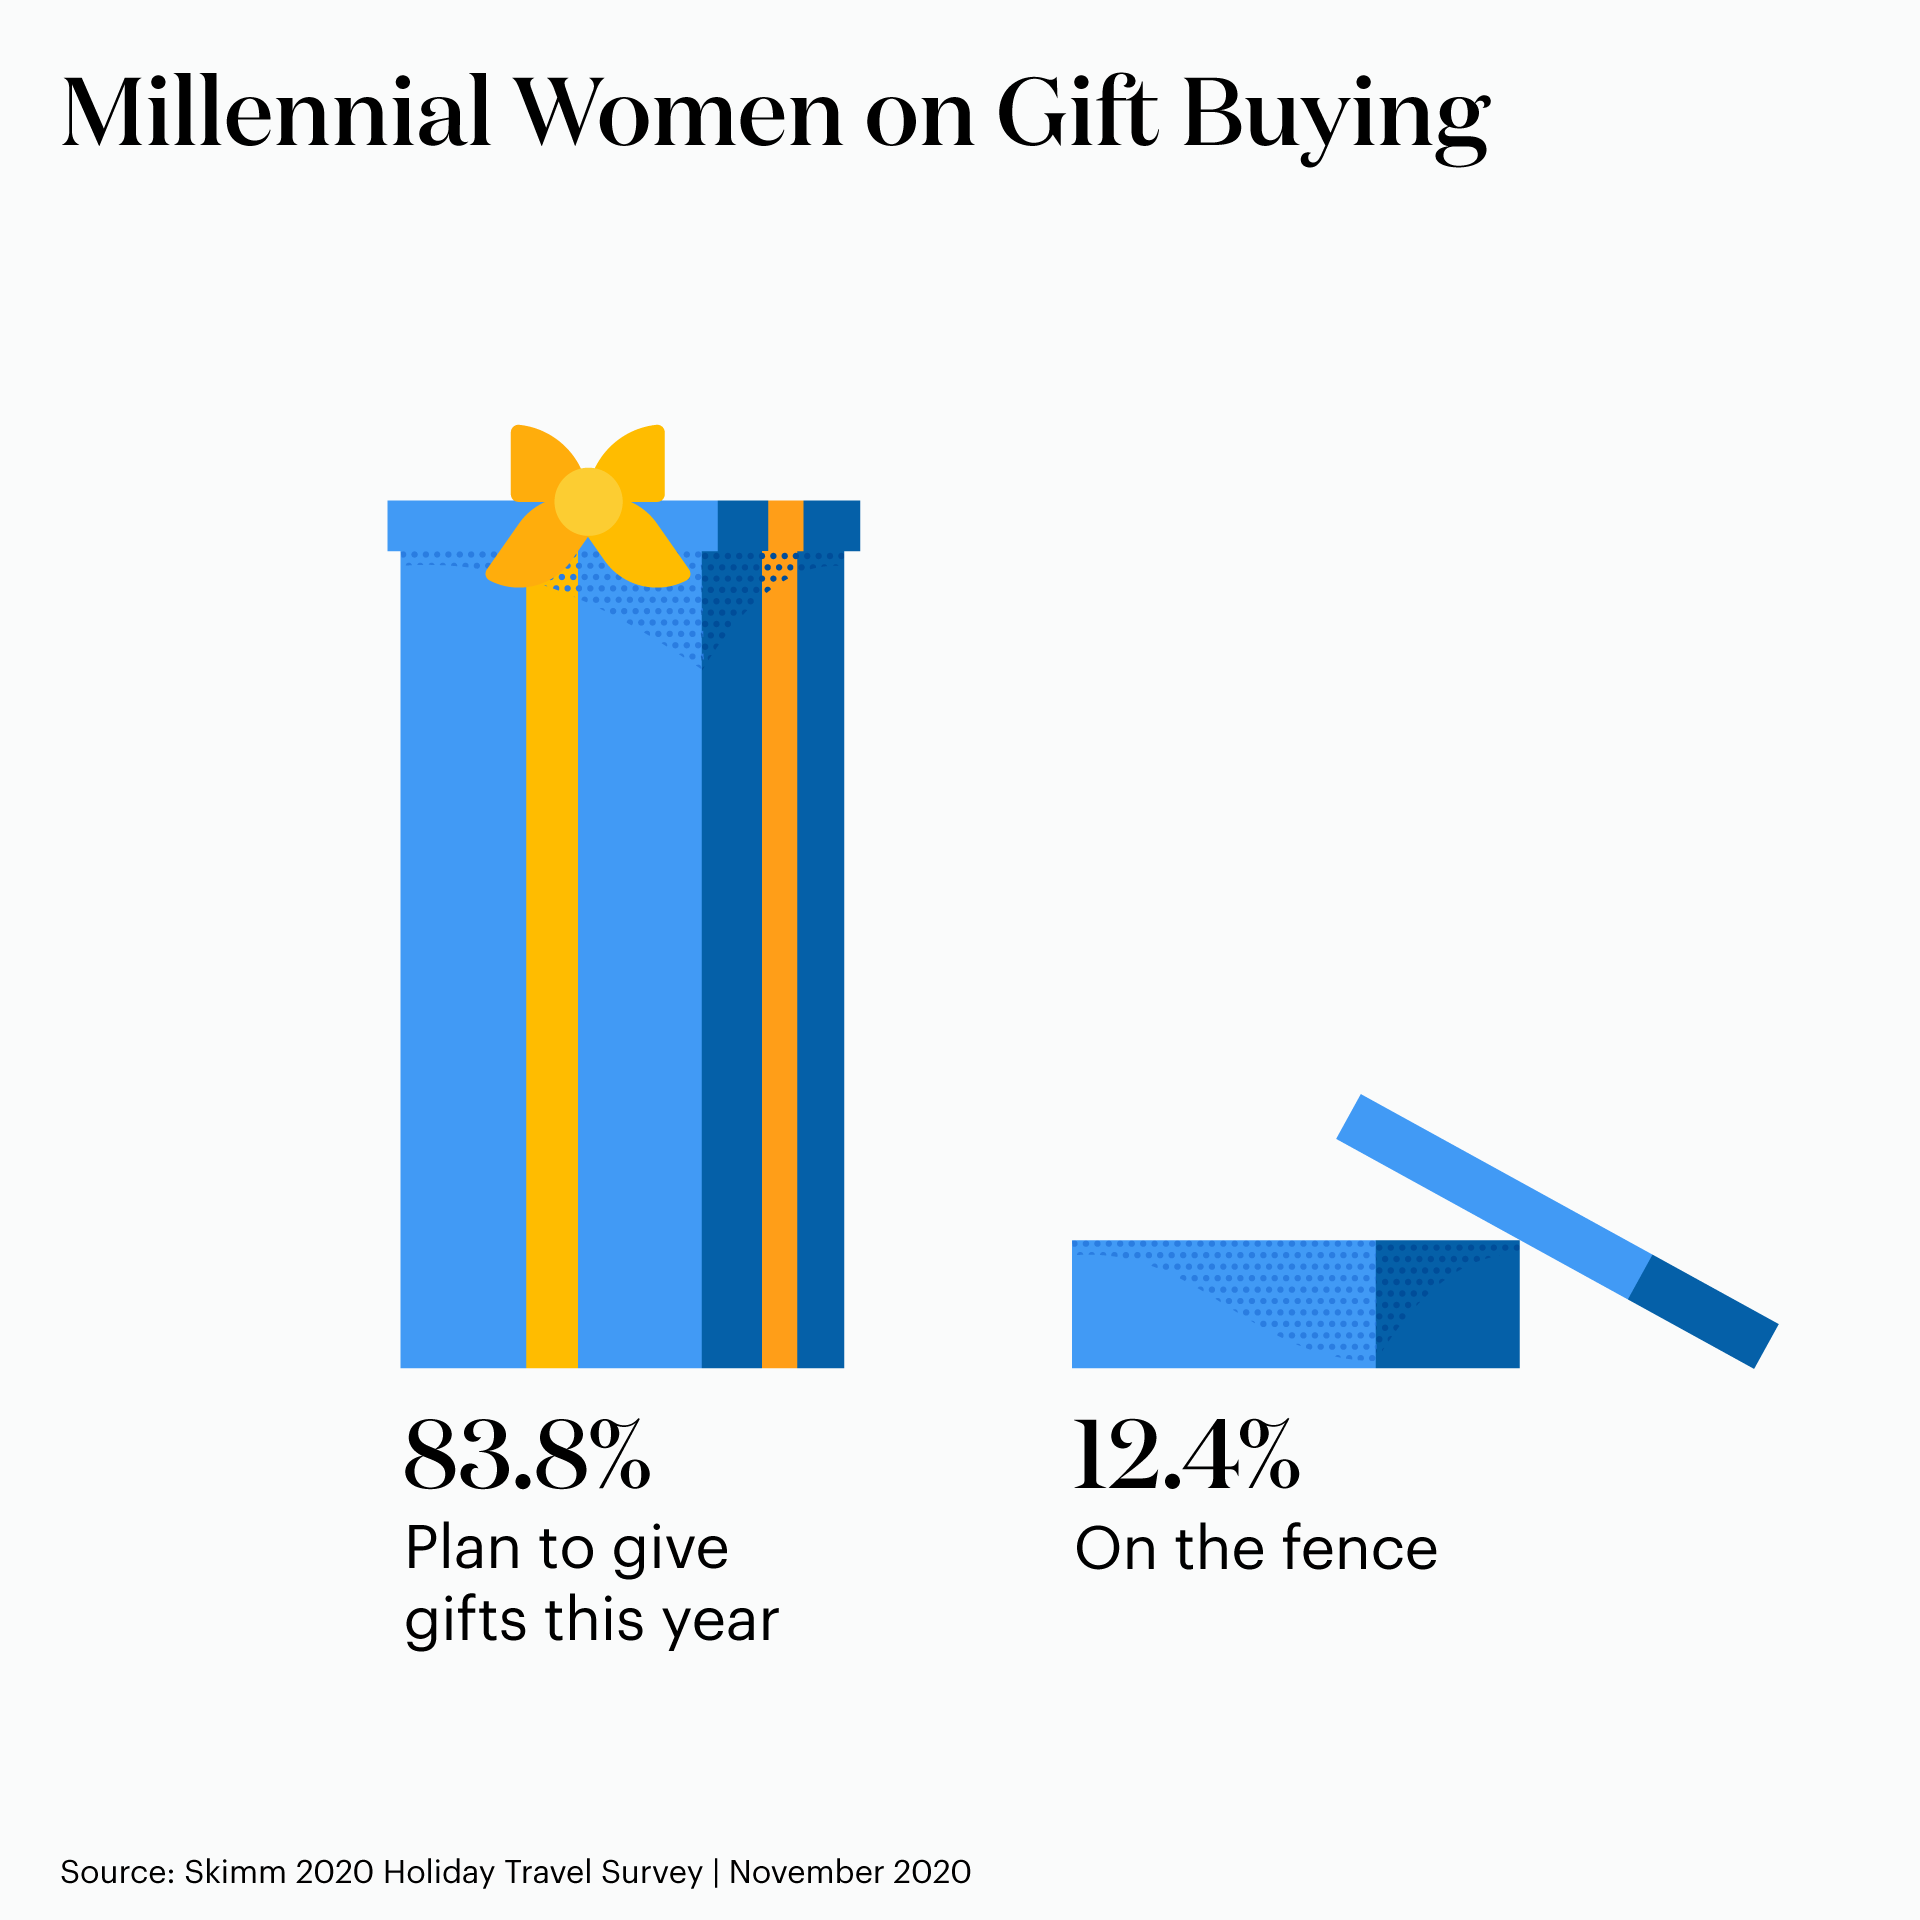 83.8% still plan to give gifts this holiday season, while 12.4% are on the fence.